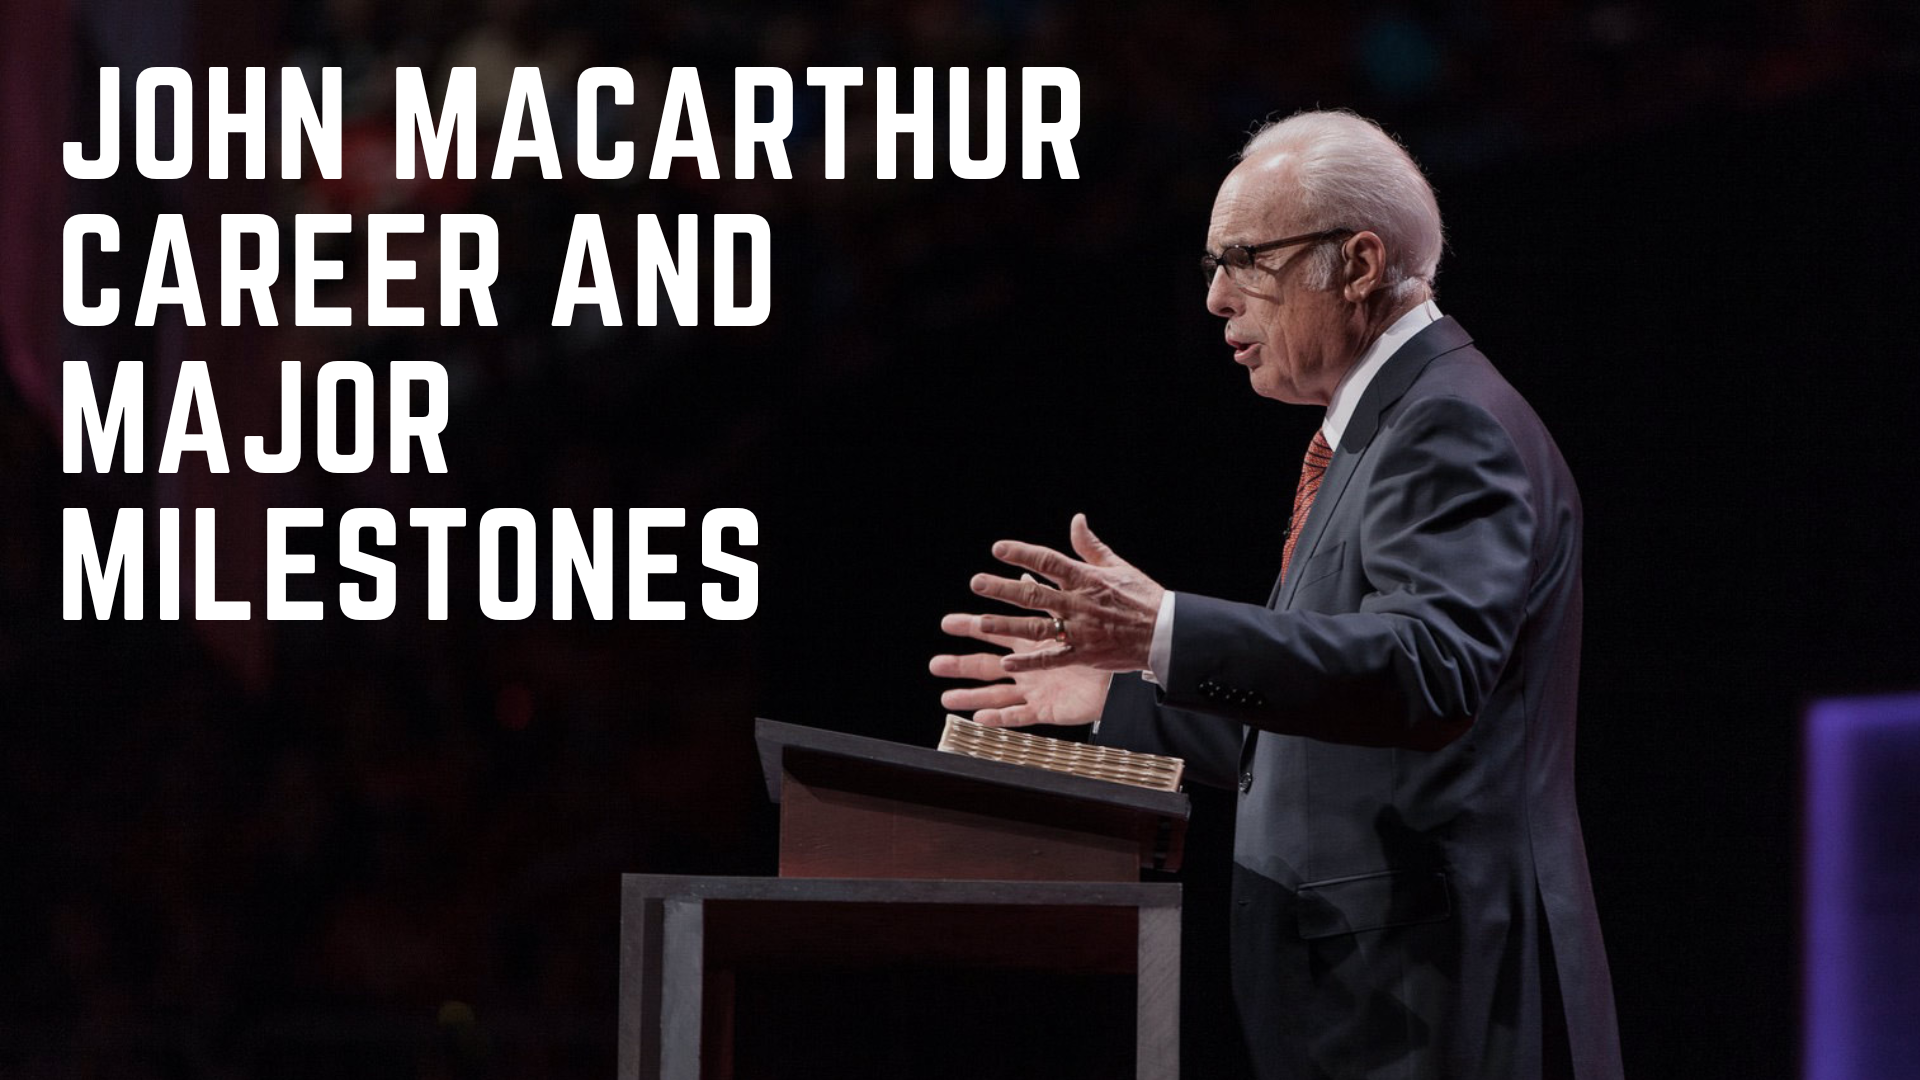 John Macarthur standing in front of a podium with a Bible